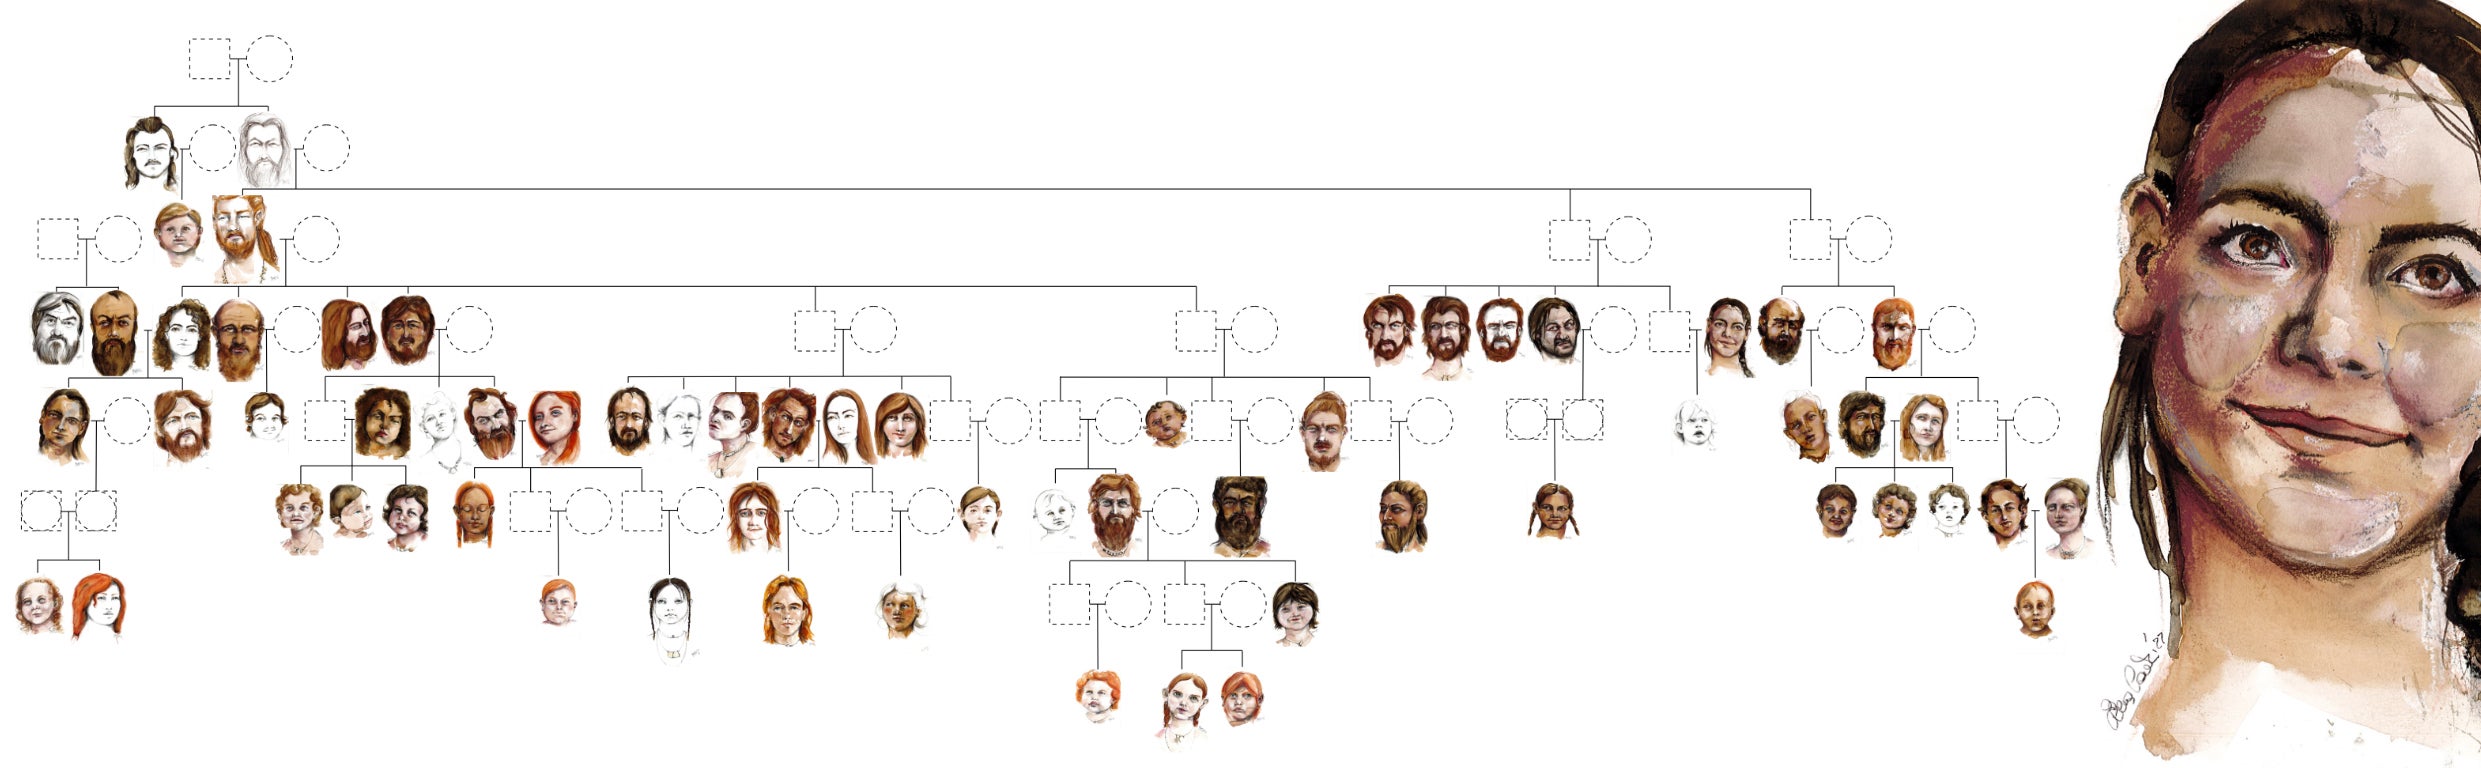 Reconstructed family tree of the largest genetically related group in Gurgy. The painted portraits are an artistic interpretation of the individuals based on physical traits estimated from DNA (where available). The dotted squares (genetically male) and circles (genetically female) represent individuals who were not found at the site or did not provide sufficient DNA for analysis. CREDIT Drawing by Elena Plain; reproduced with the permission of the University of Bordeaux / PACEA